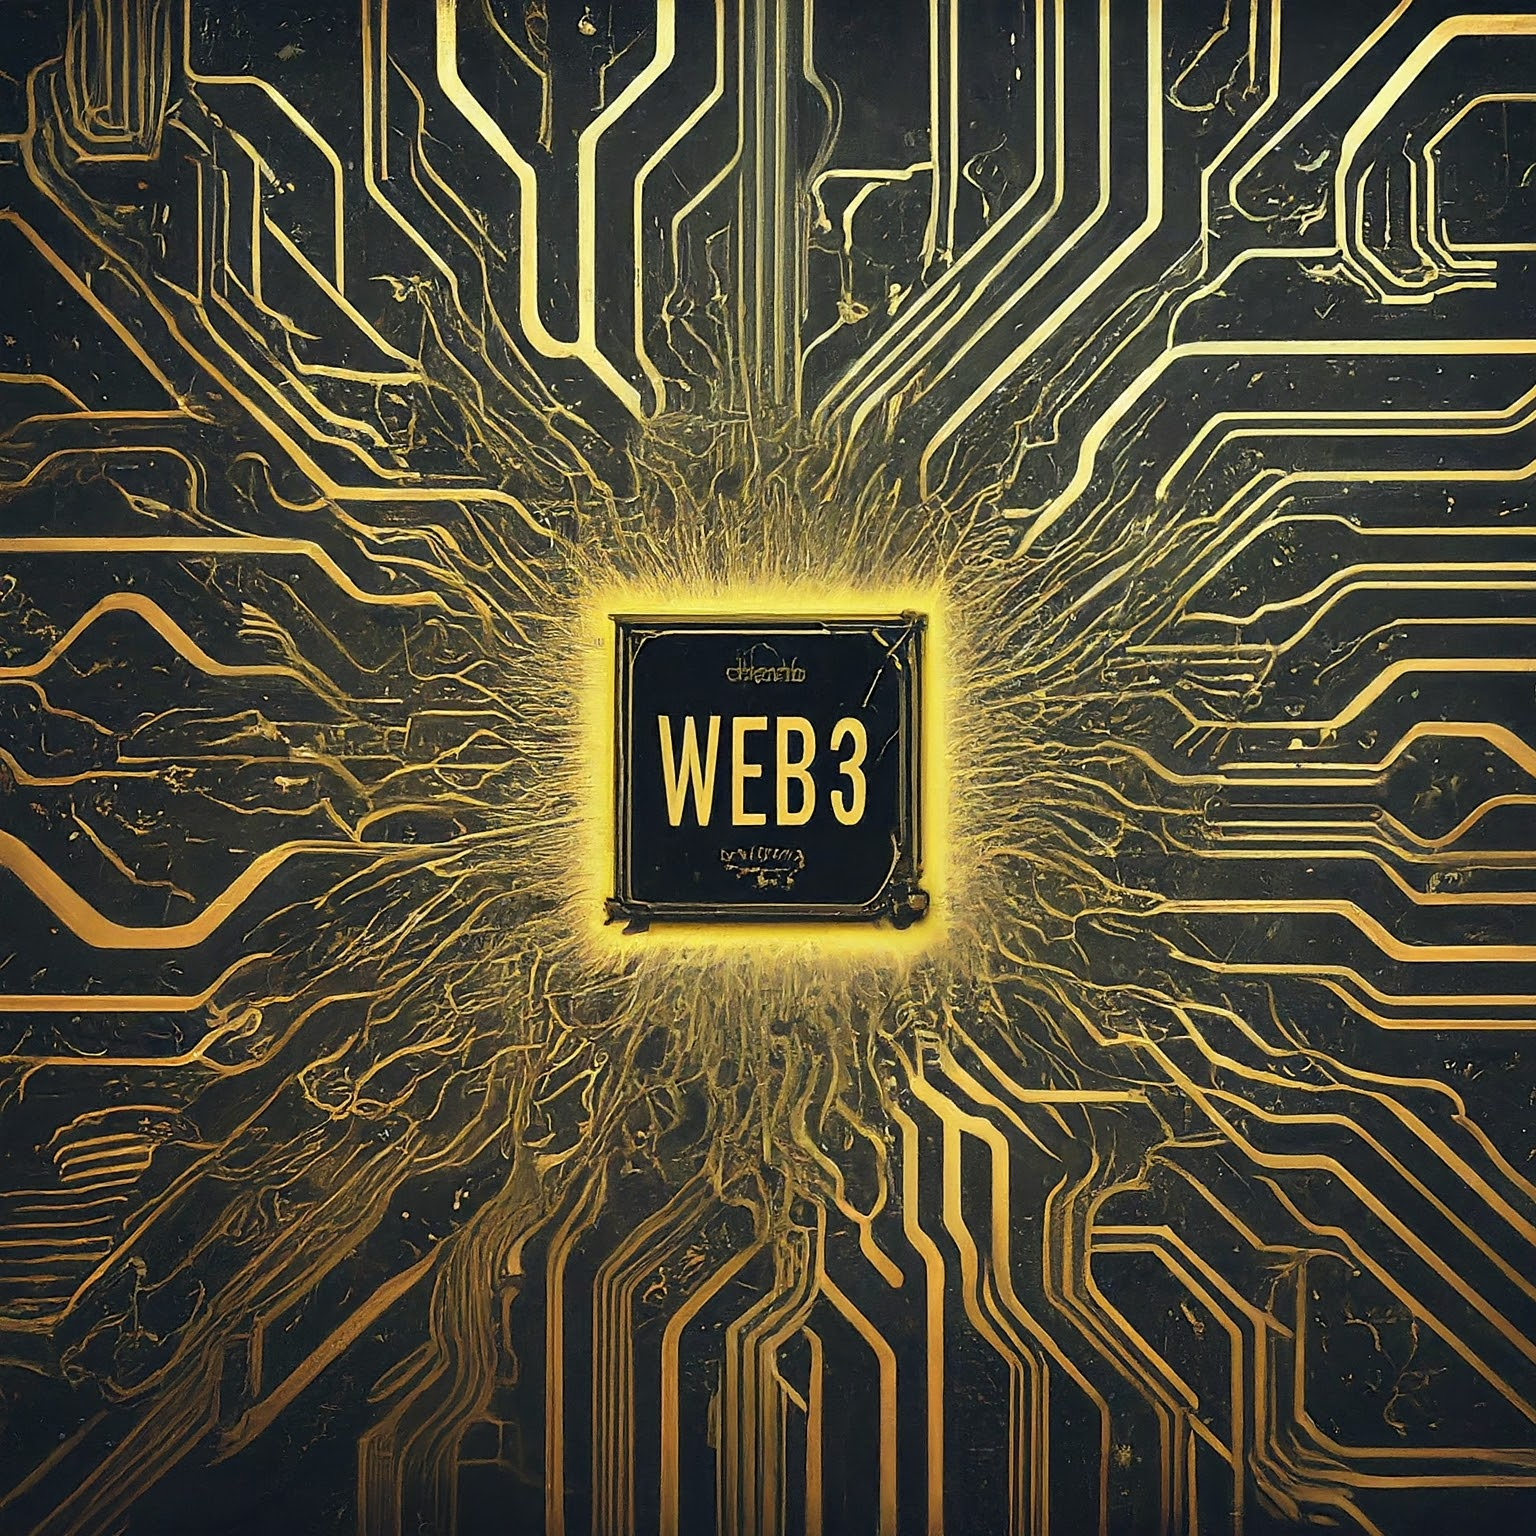 The image depicts  an intricate circuit board in gold, with glowing pathways representing the flow of data and processes within a Web3 application